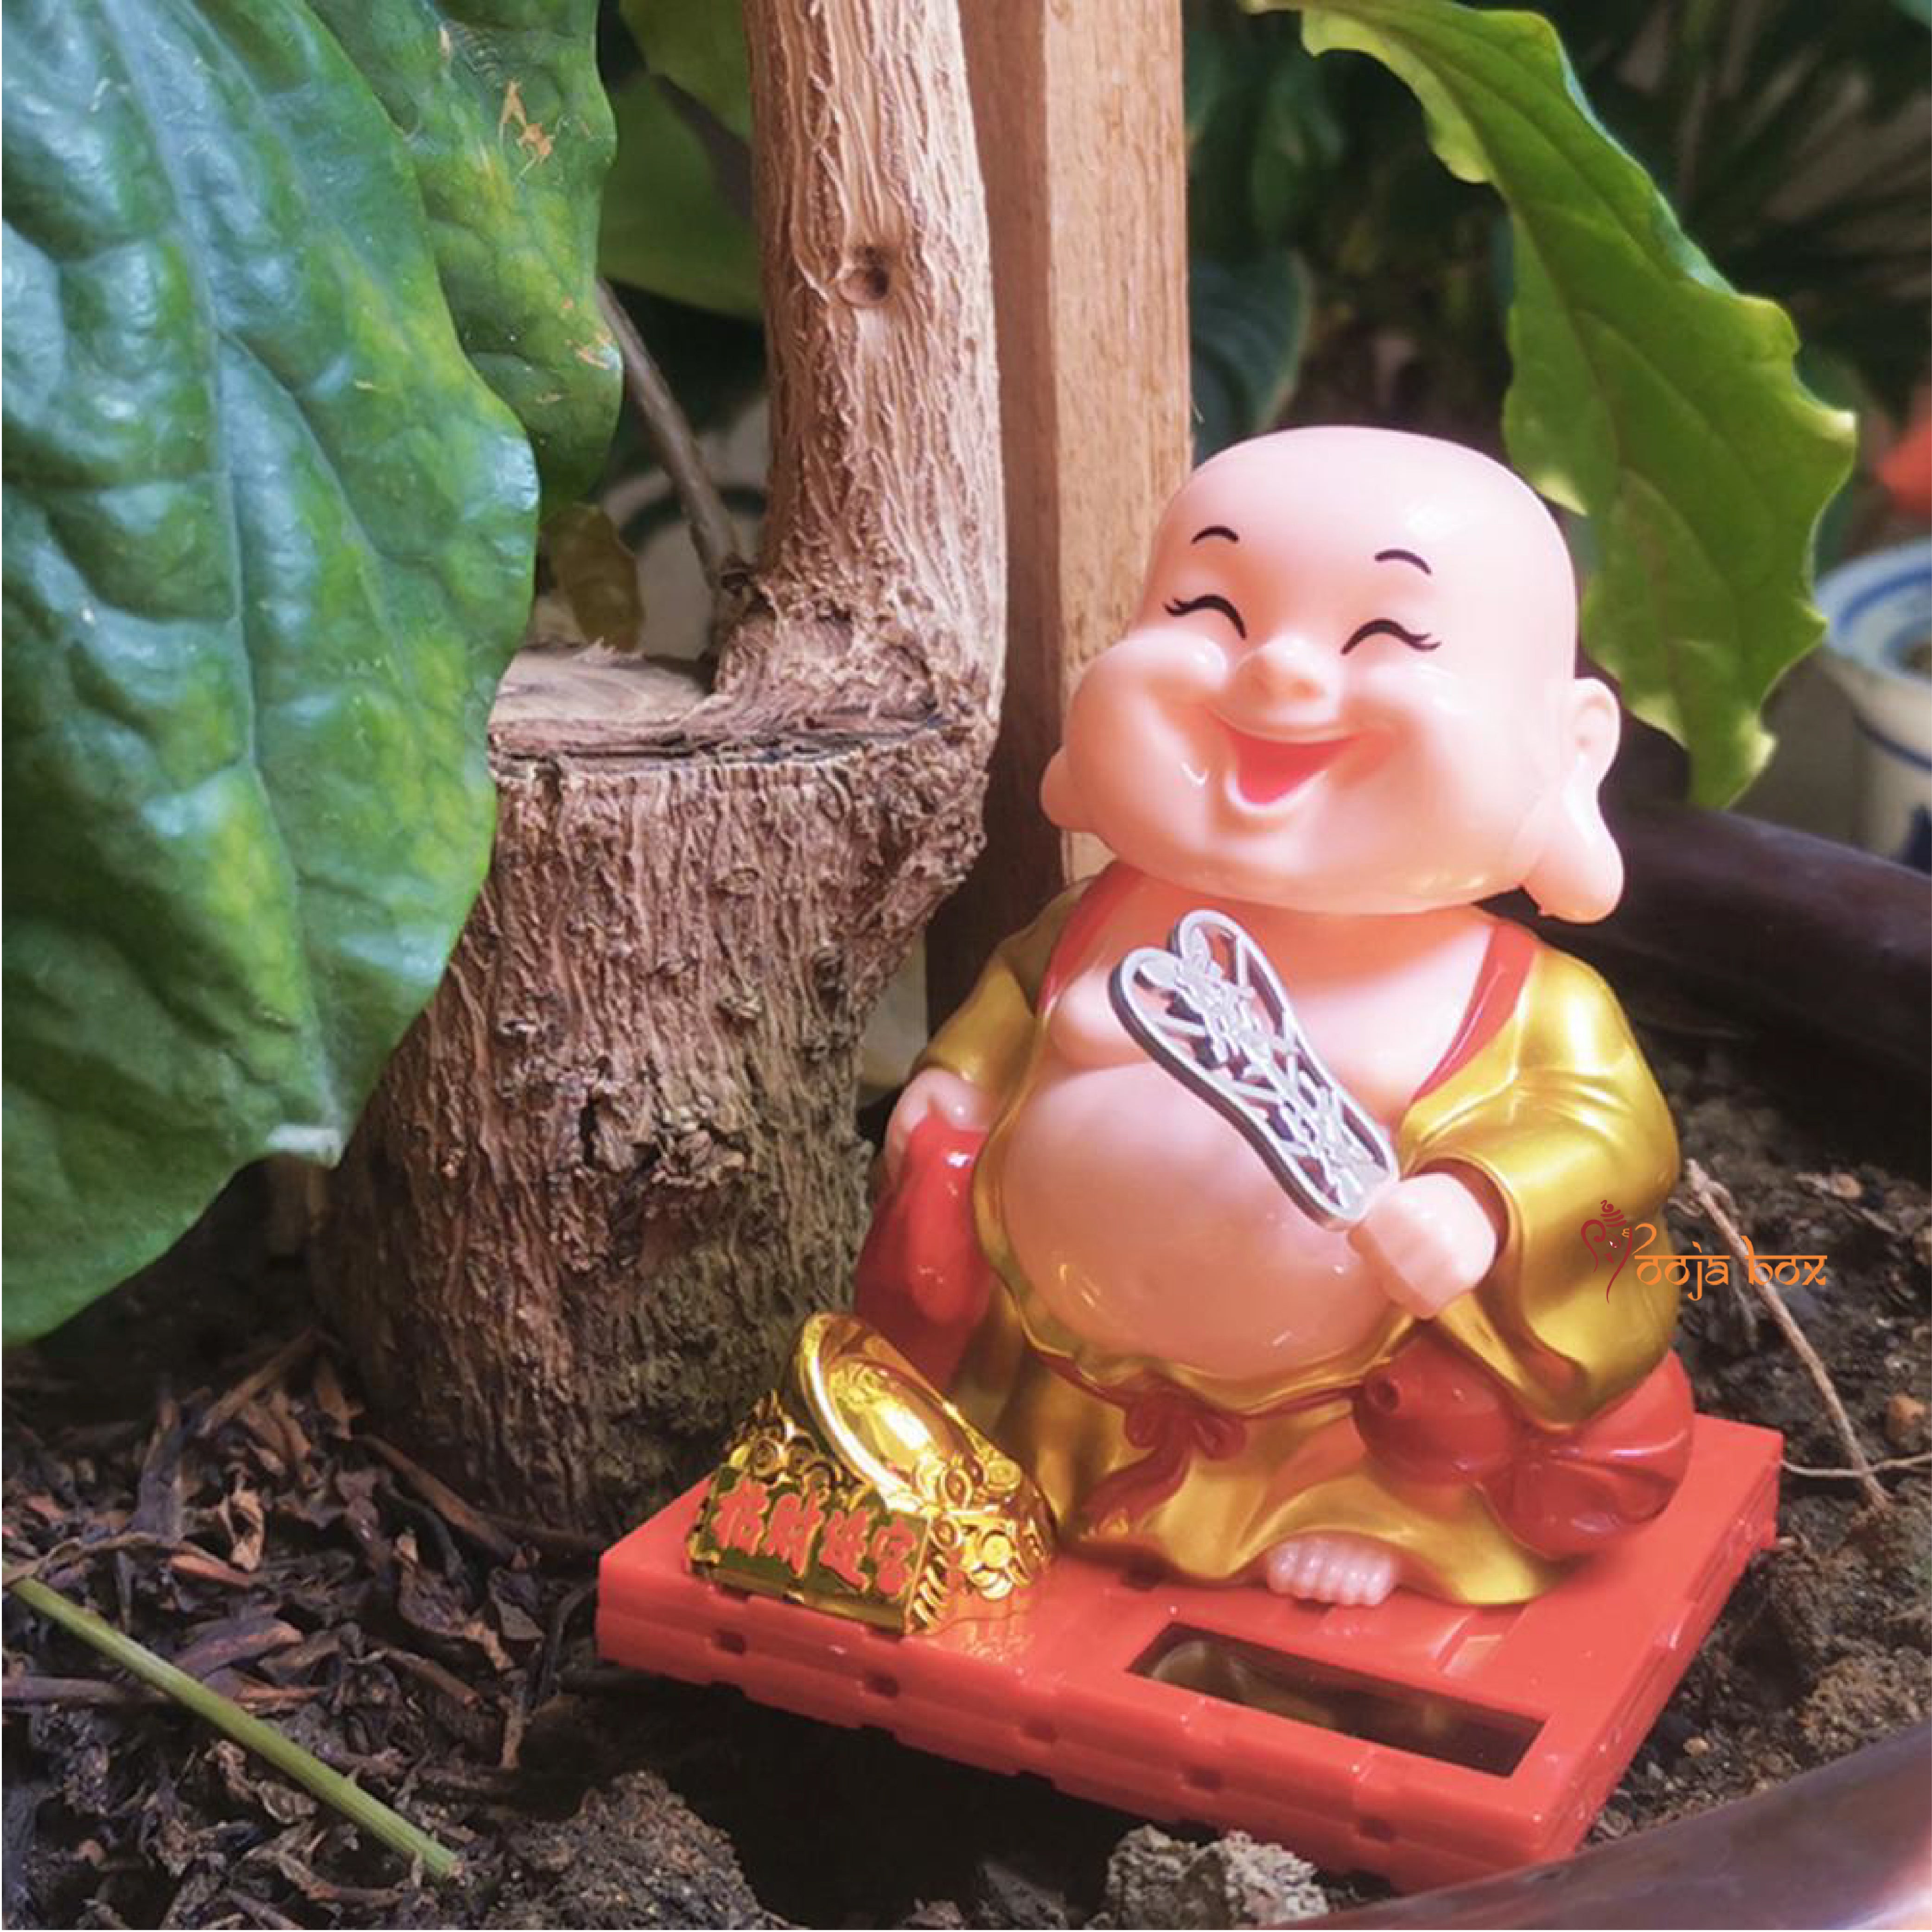 The "Ritualistic Monk" laughing Buddha holding a money bag